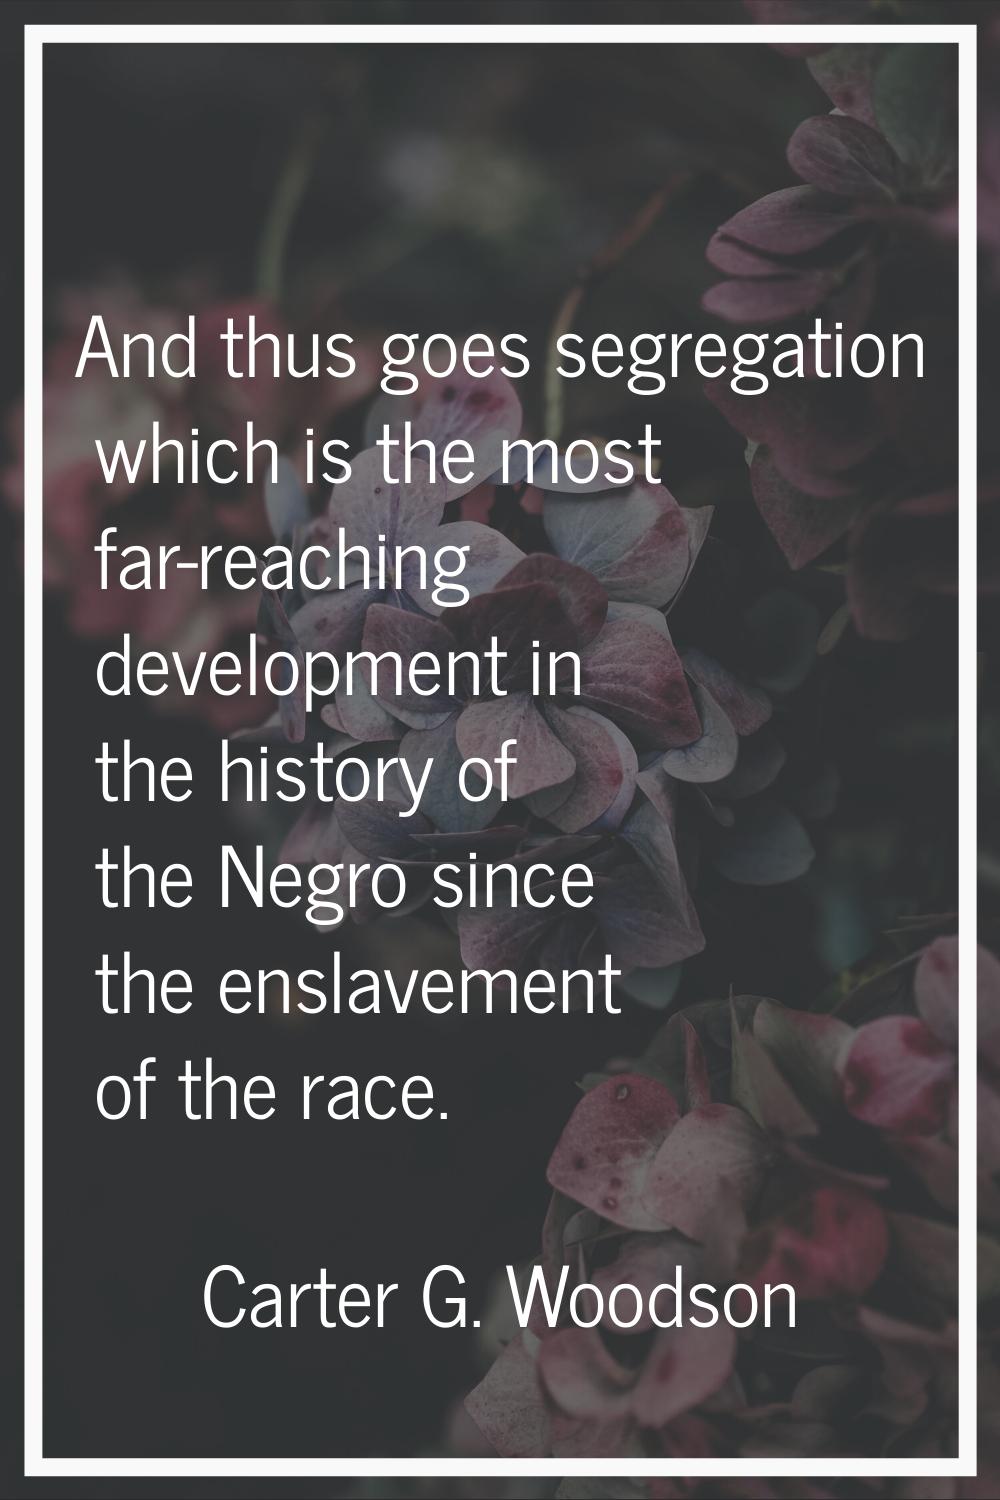 And thus goes segregation which is the most far-reaching development in the history of the Negro si